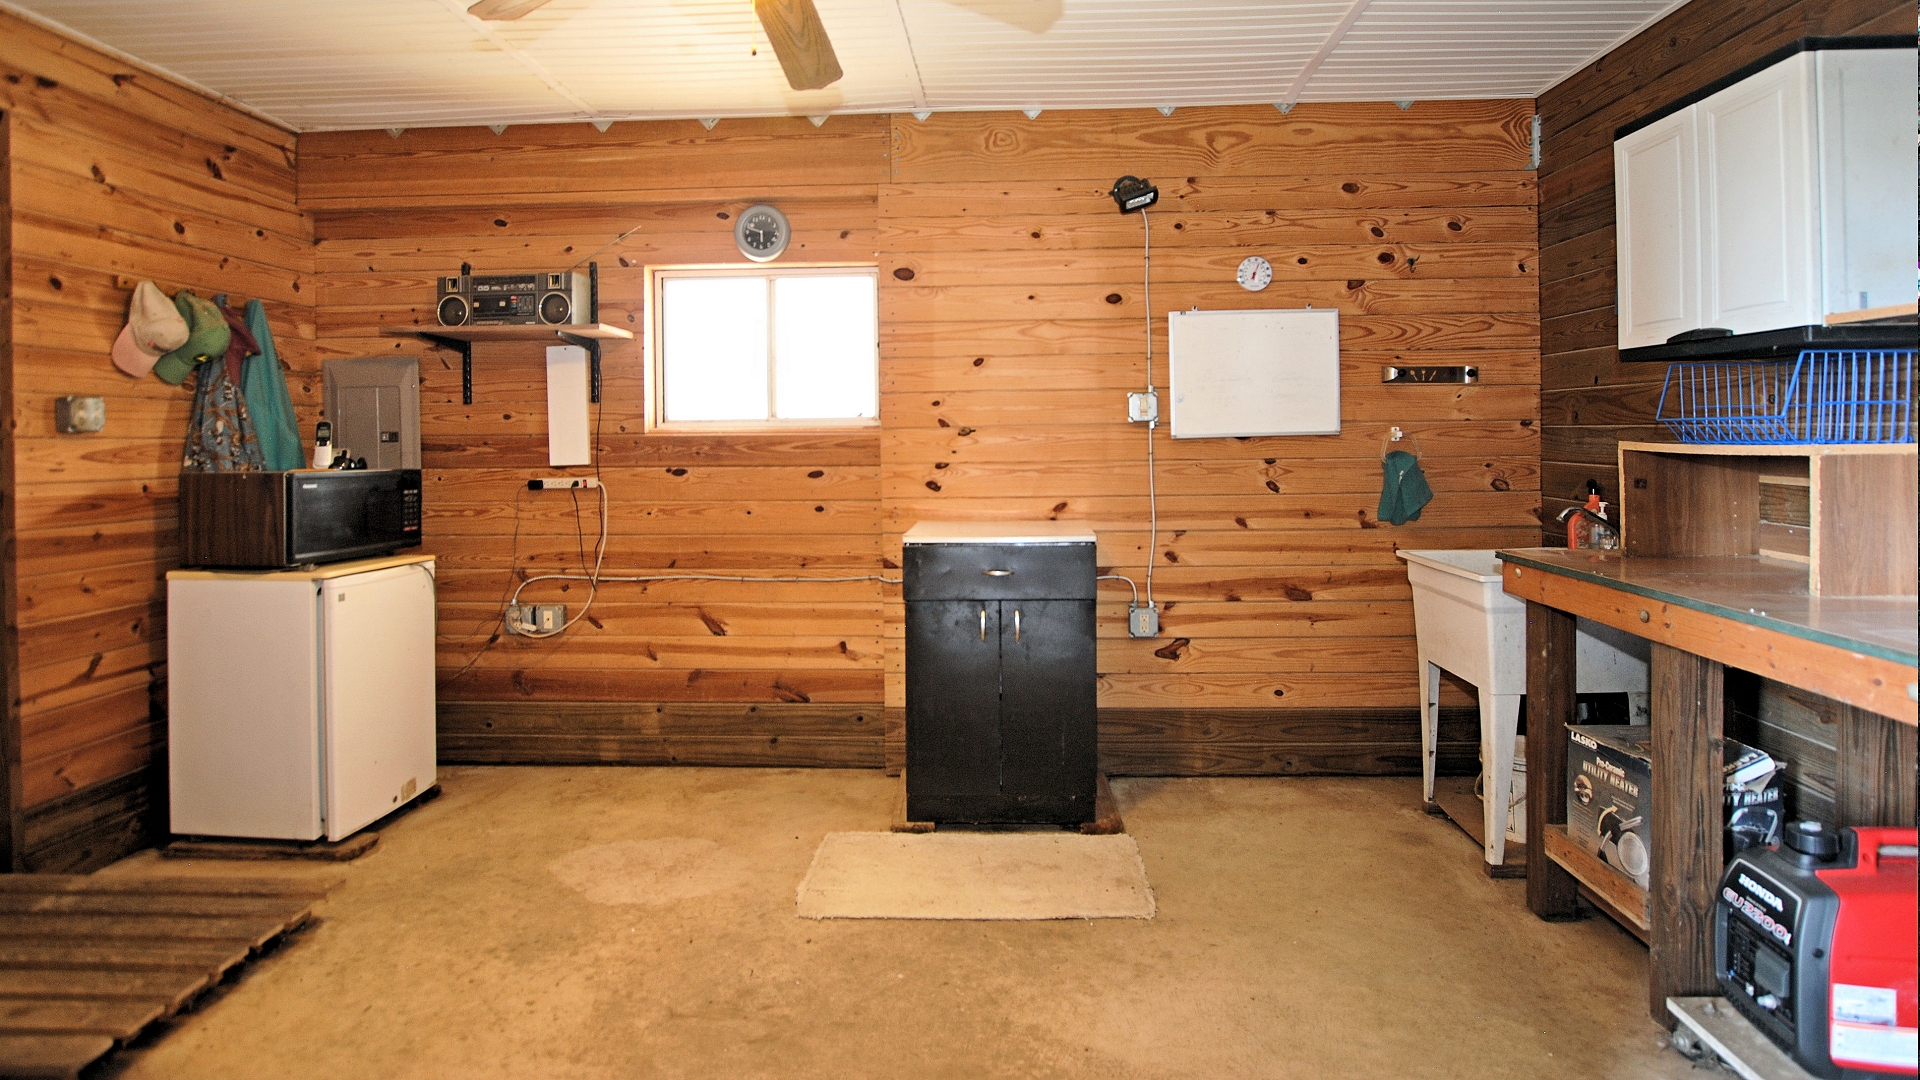 Gaited Meadows Tack Room